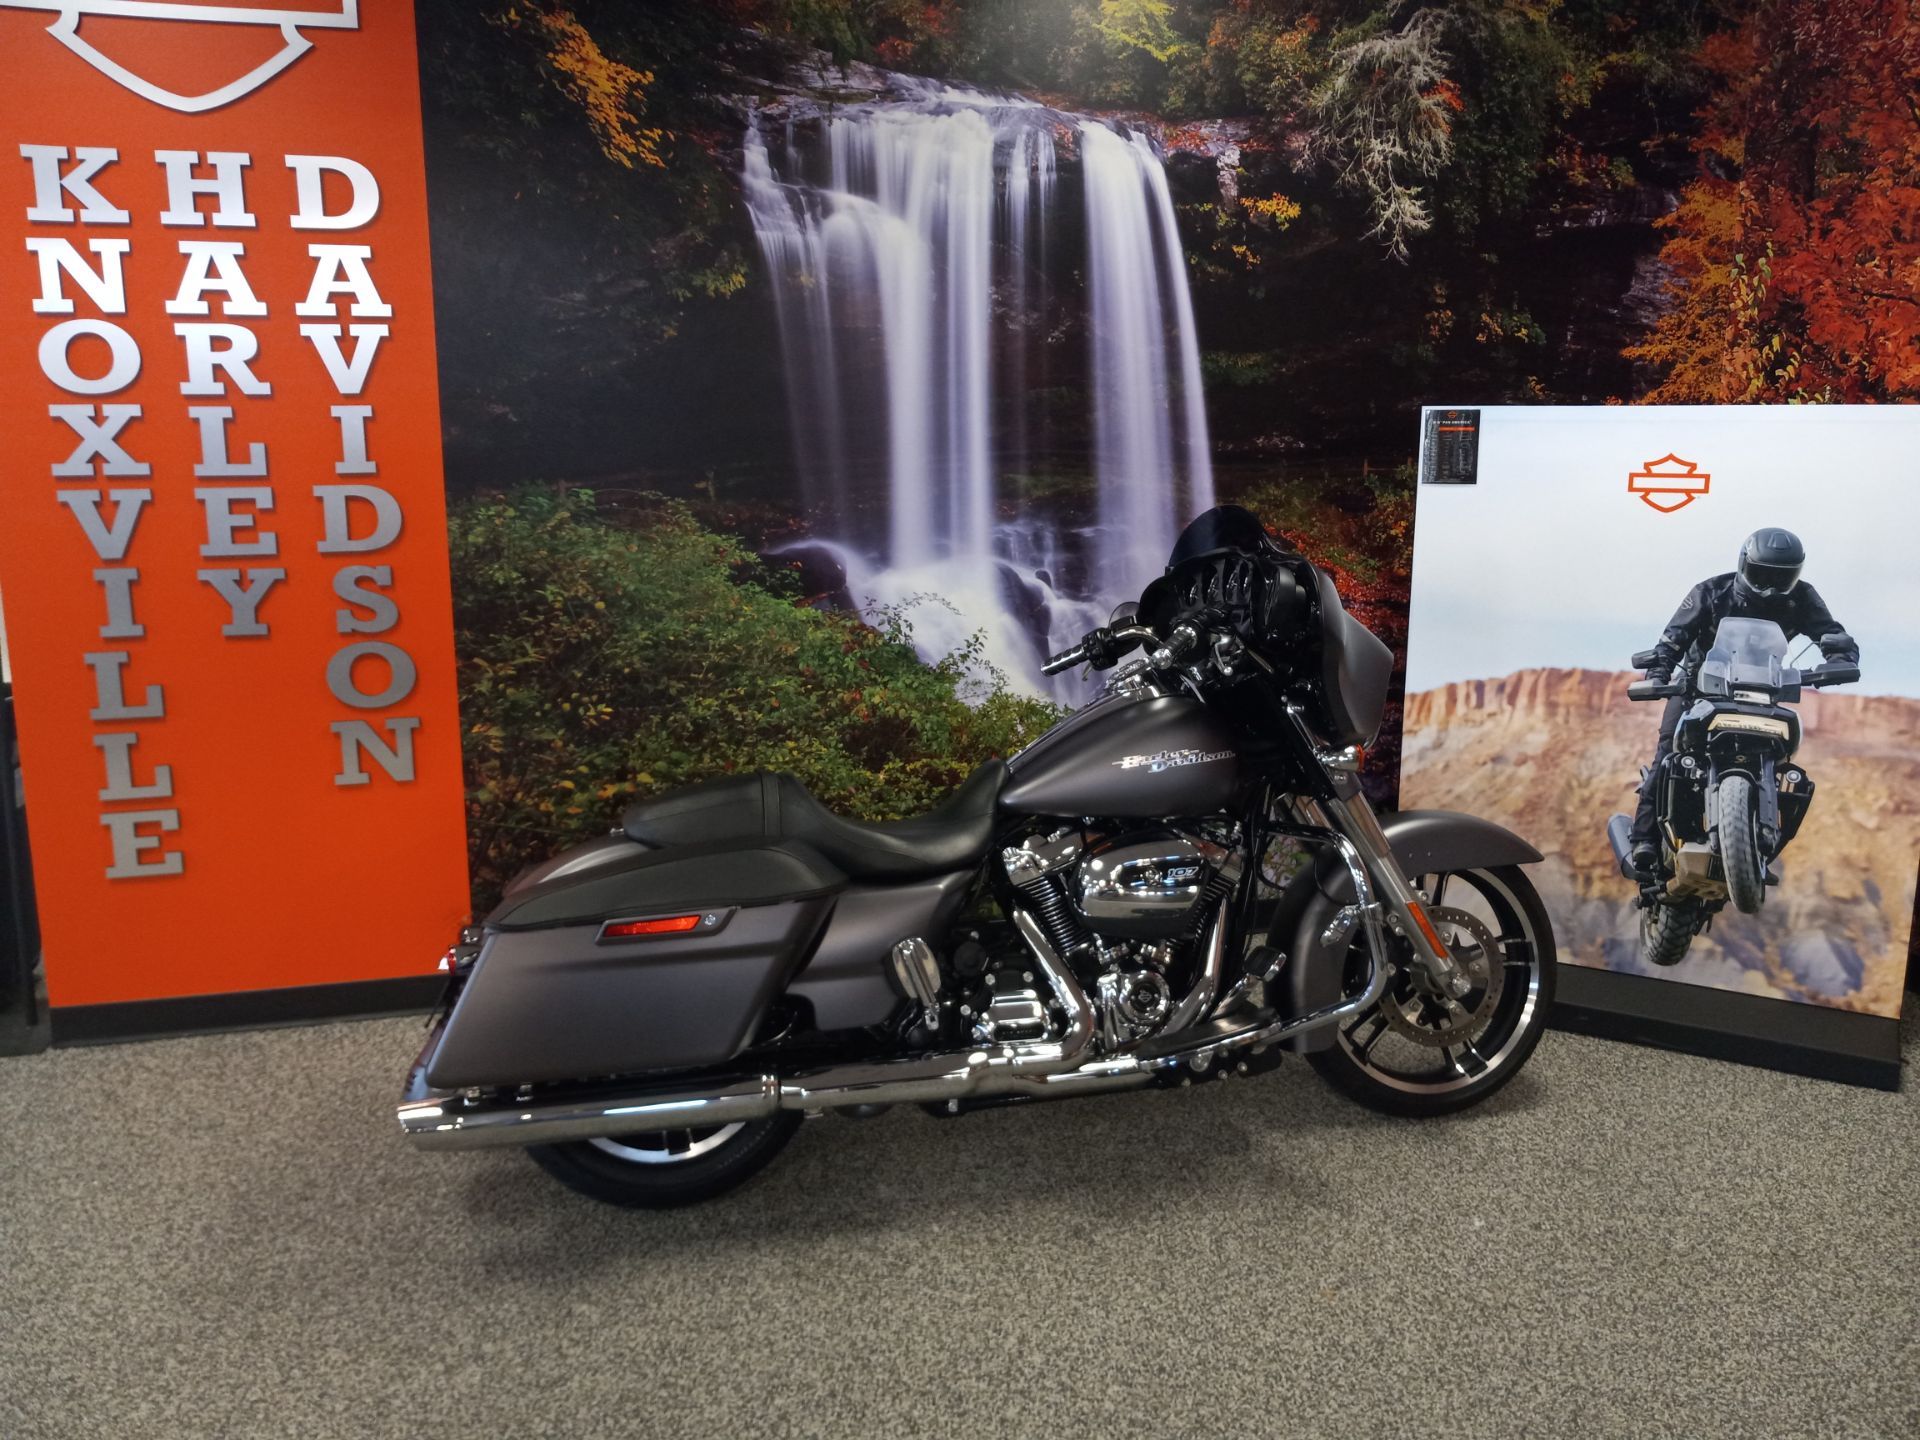 2017 Harley-Davidson Street Glide® Special in Knoxville, Tennessee - Photo 6